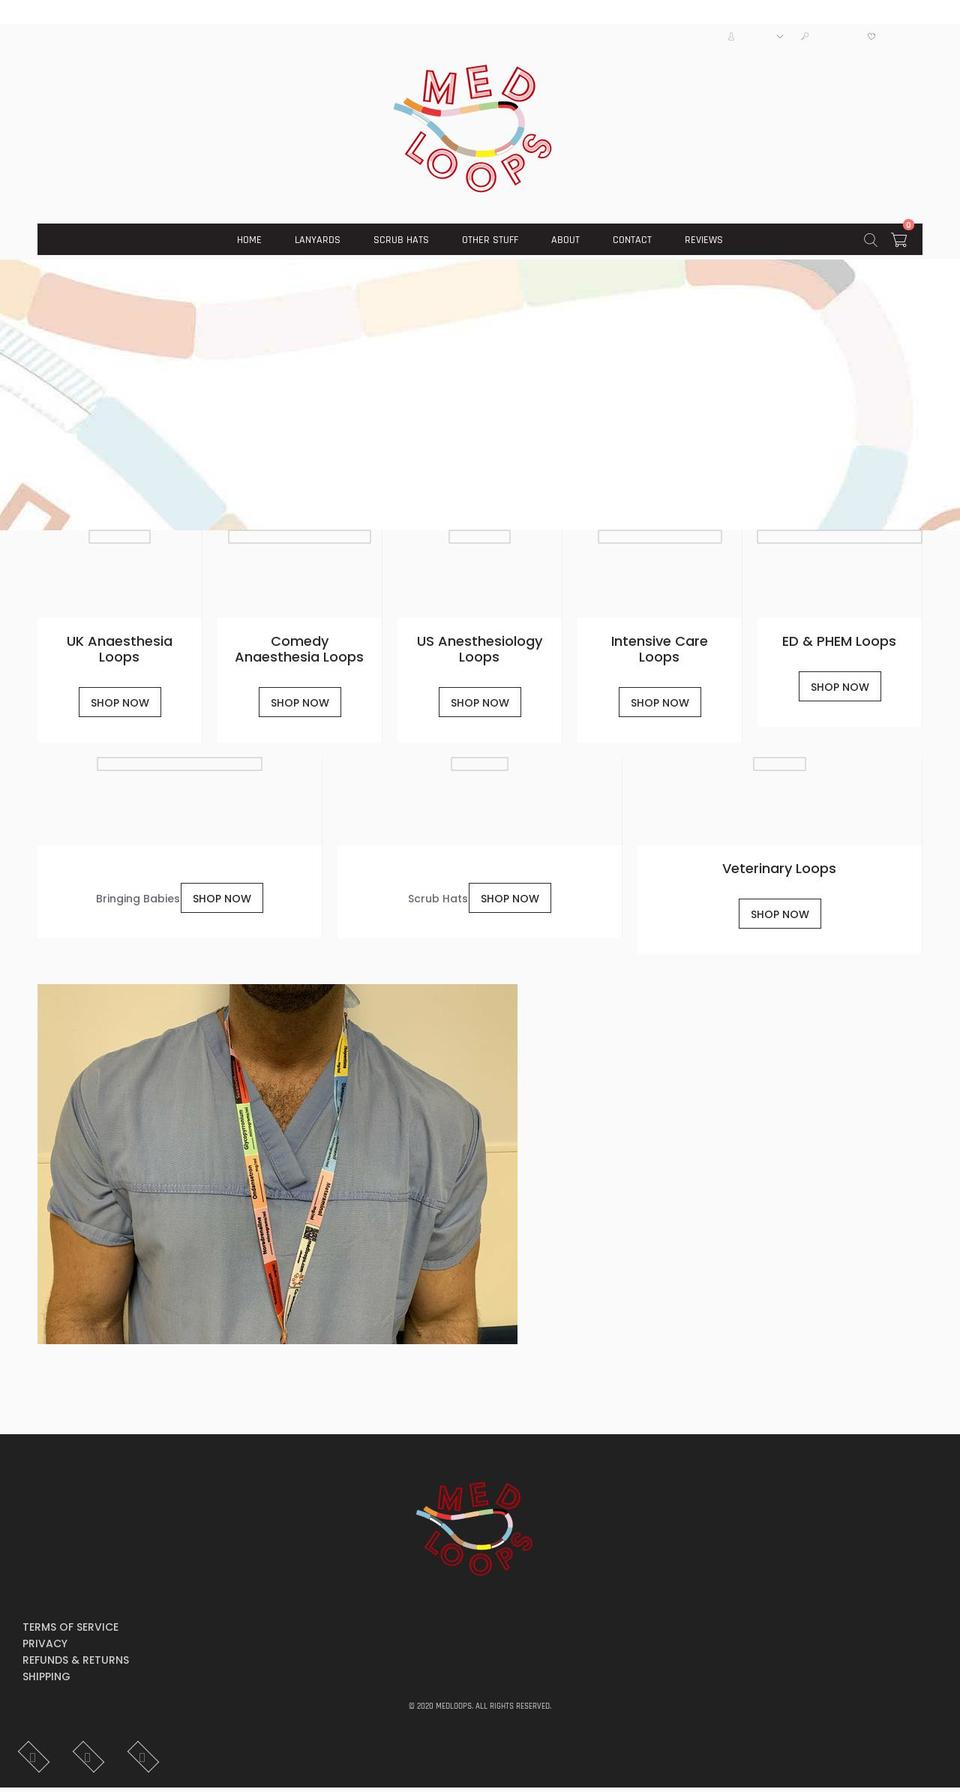 FASTEST Shopify theme site example medloops.com